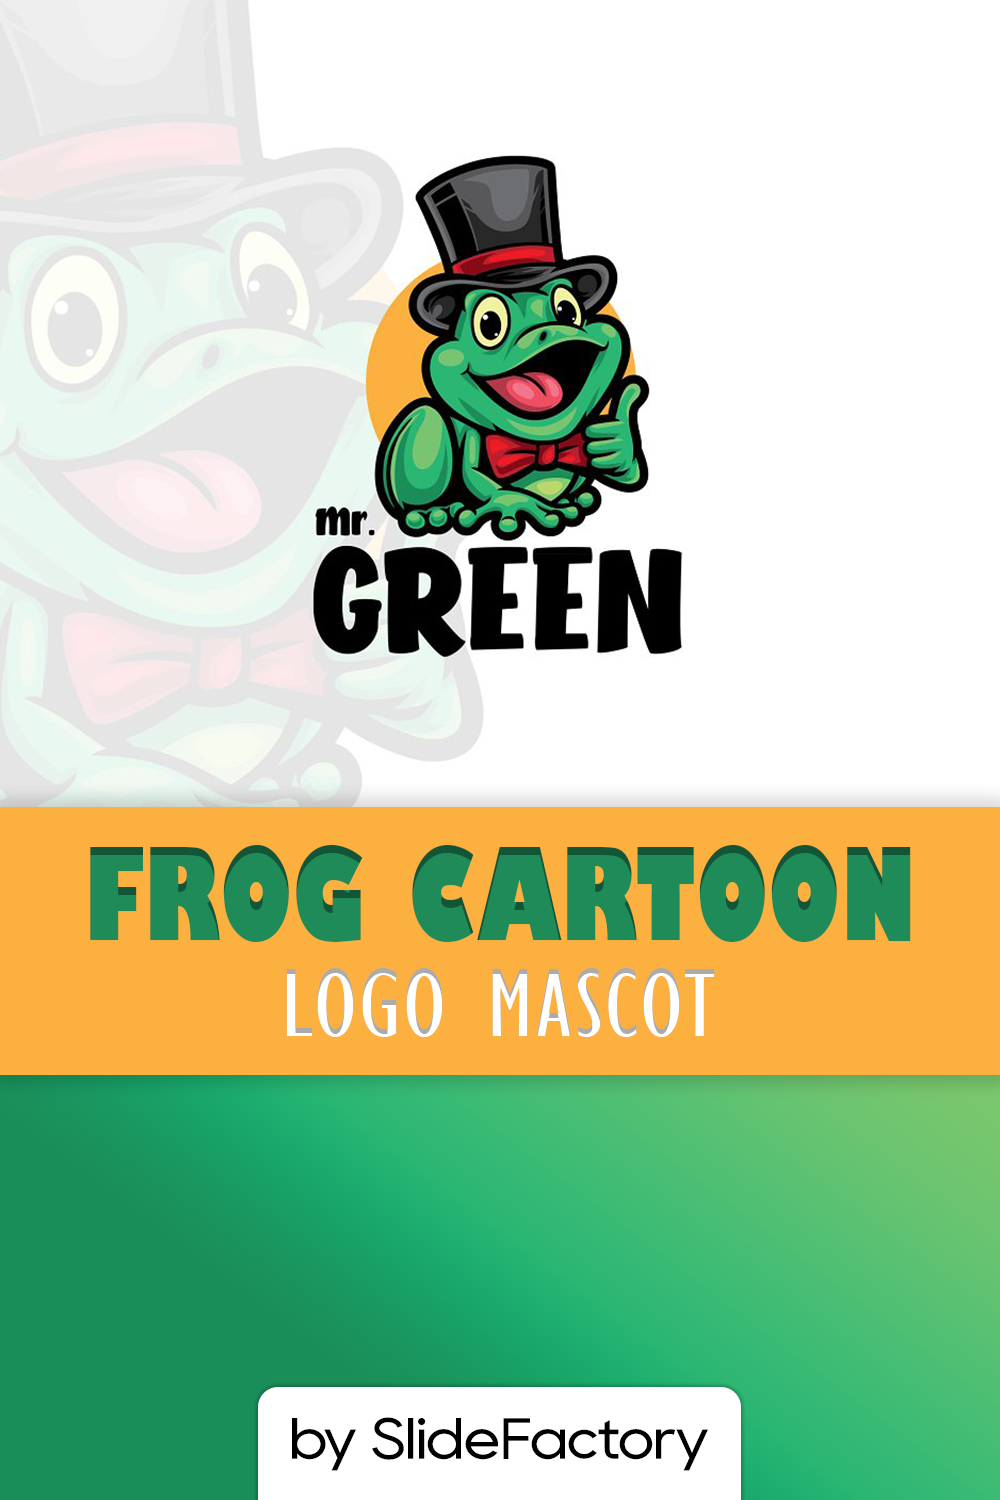 Interesting frog in an mascot style.